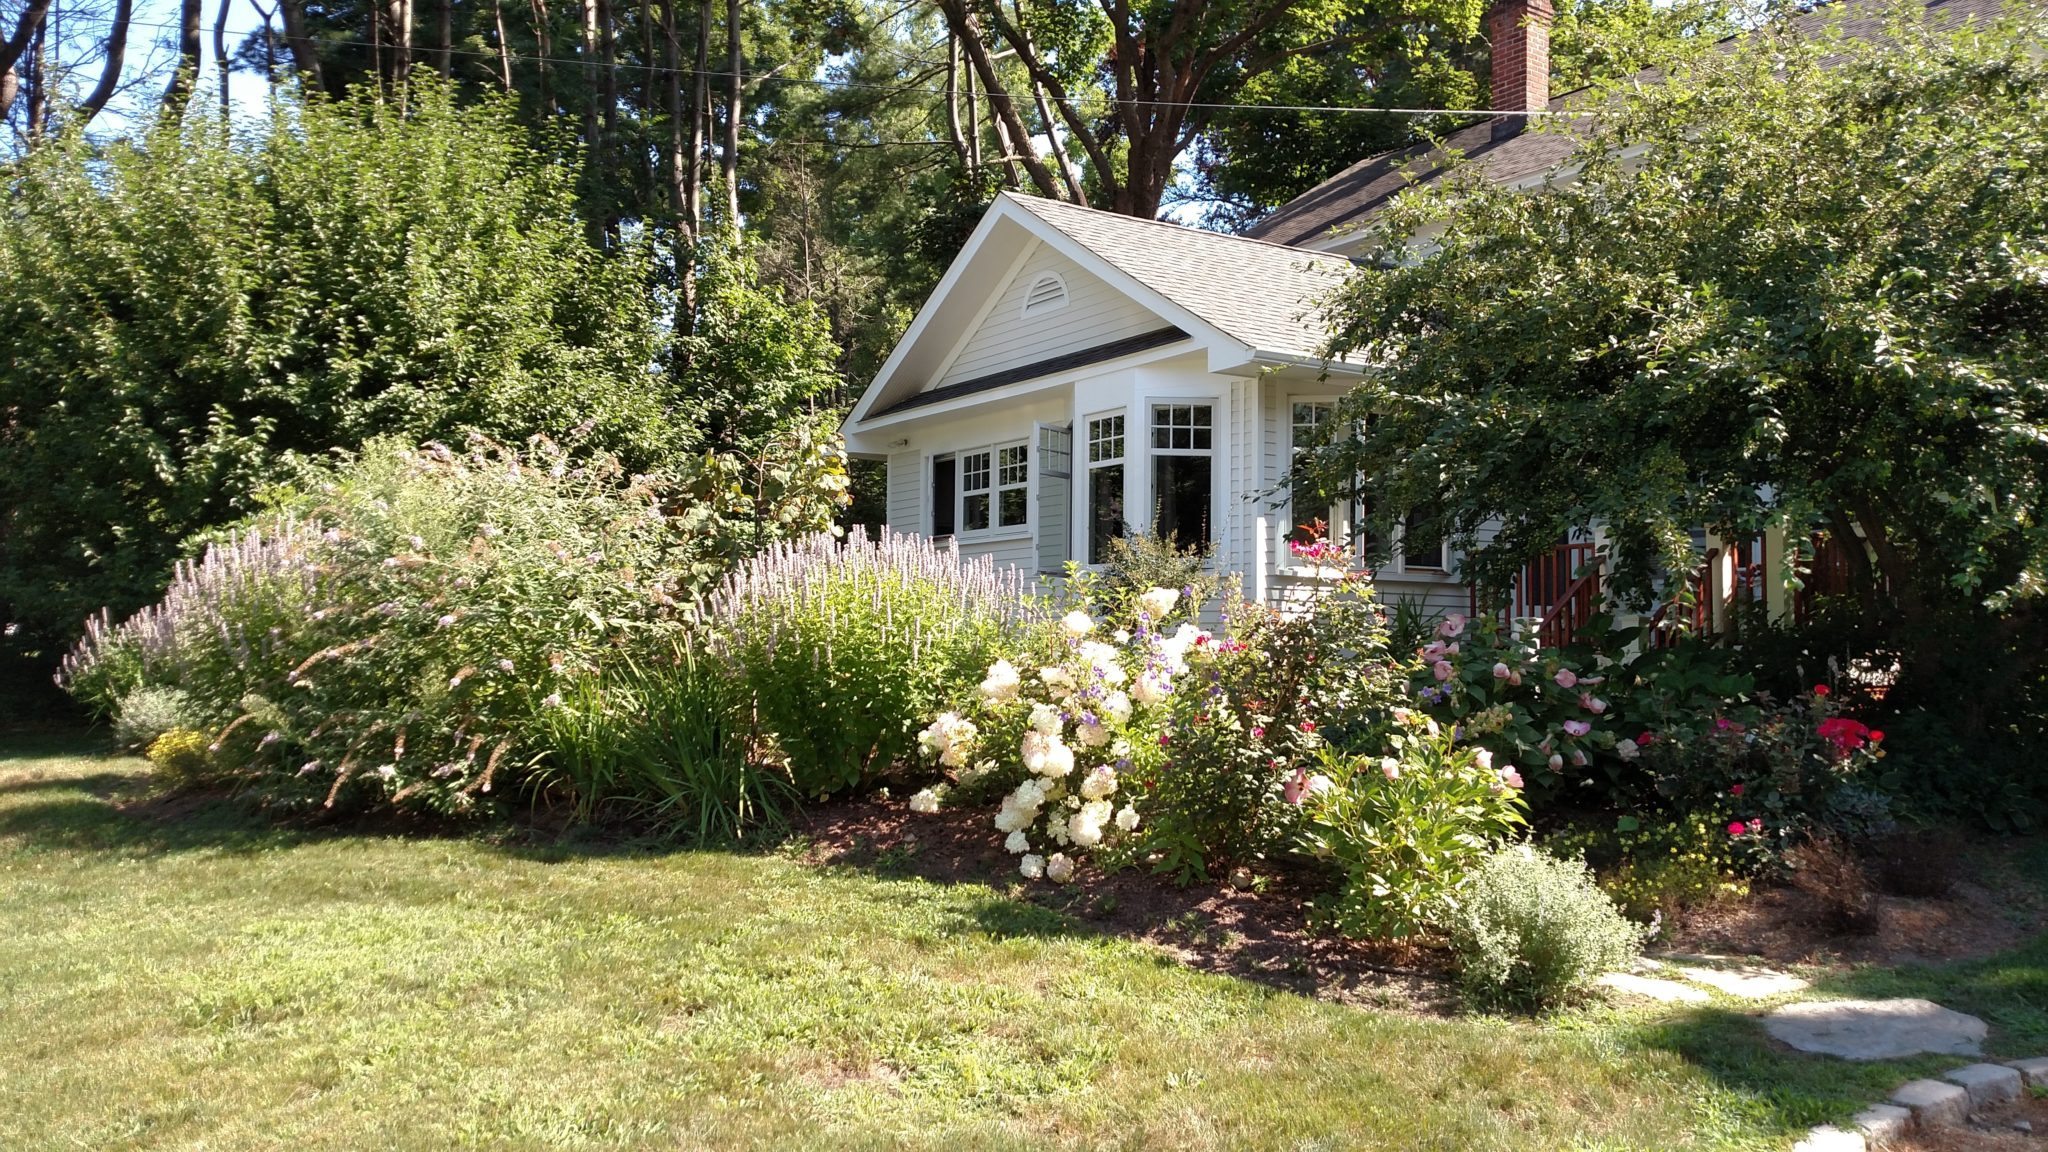 Planning to sell your home next spring? Fall is the time to spruce up your yard!